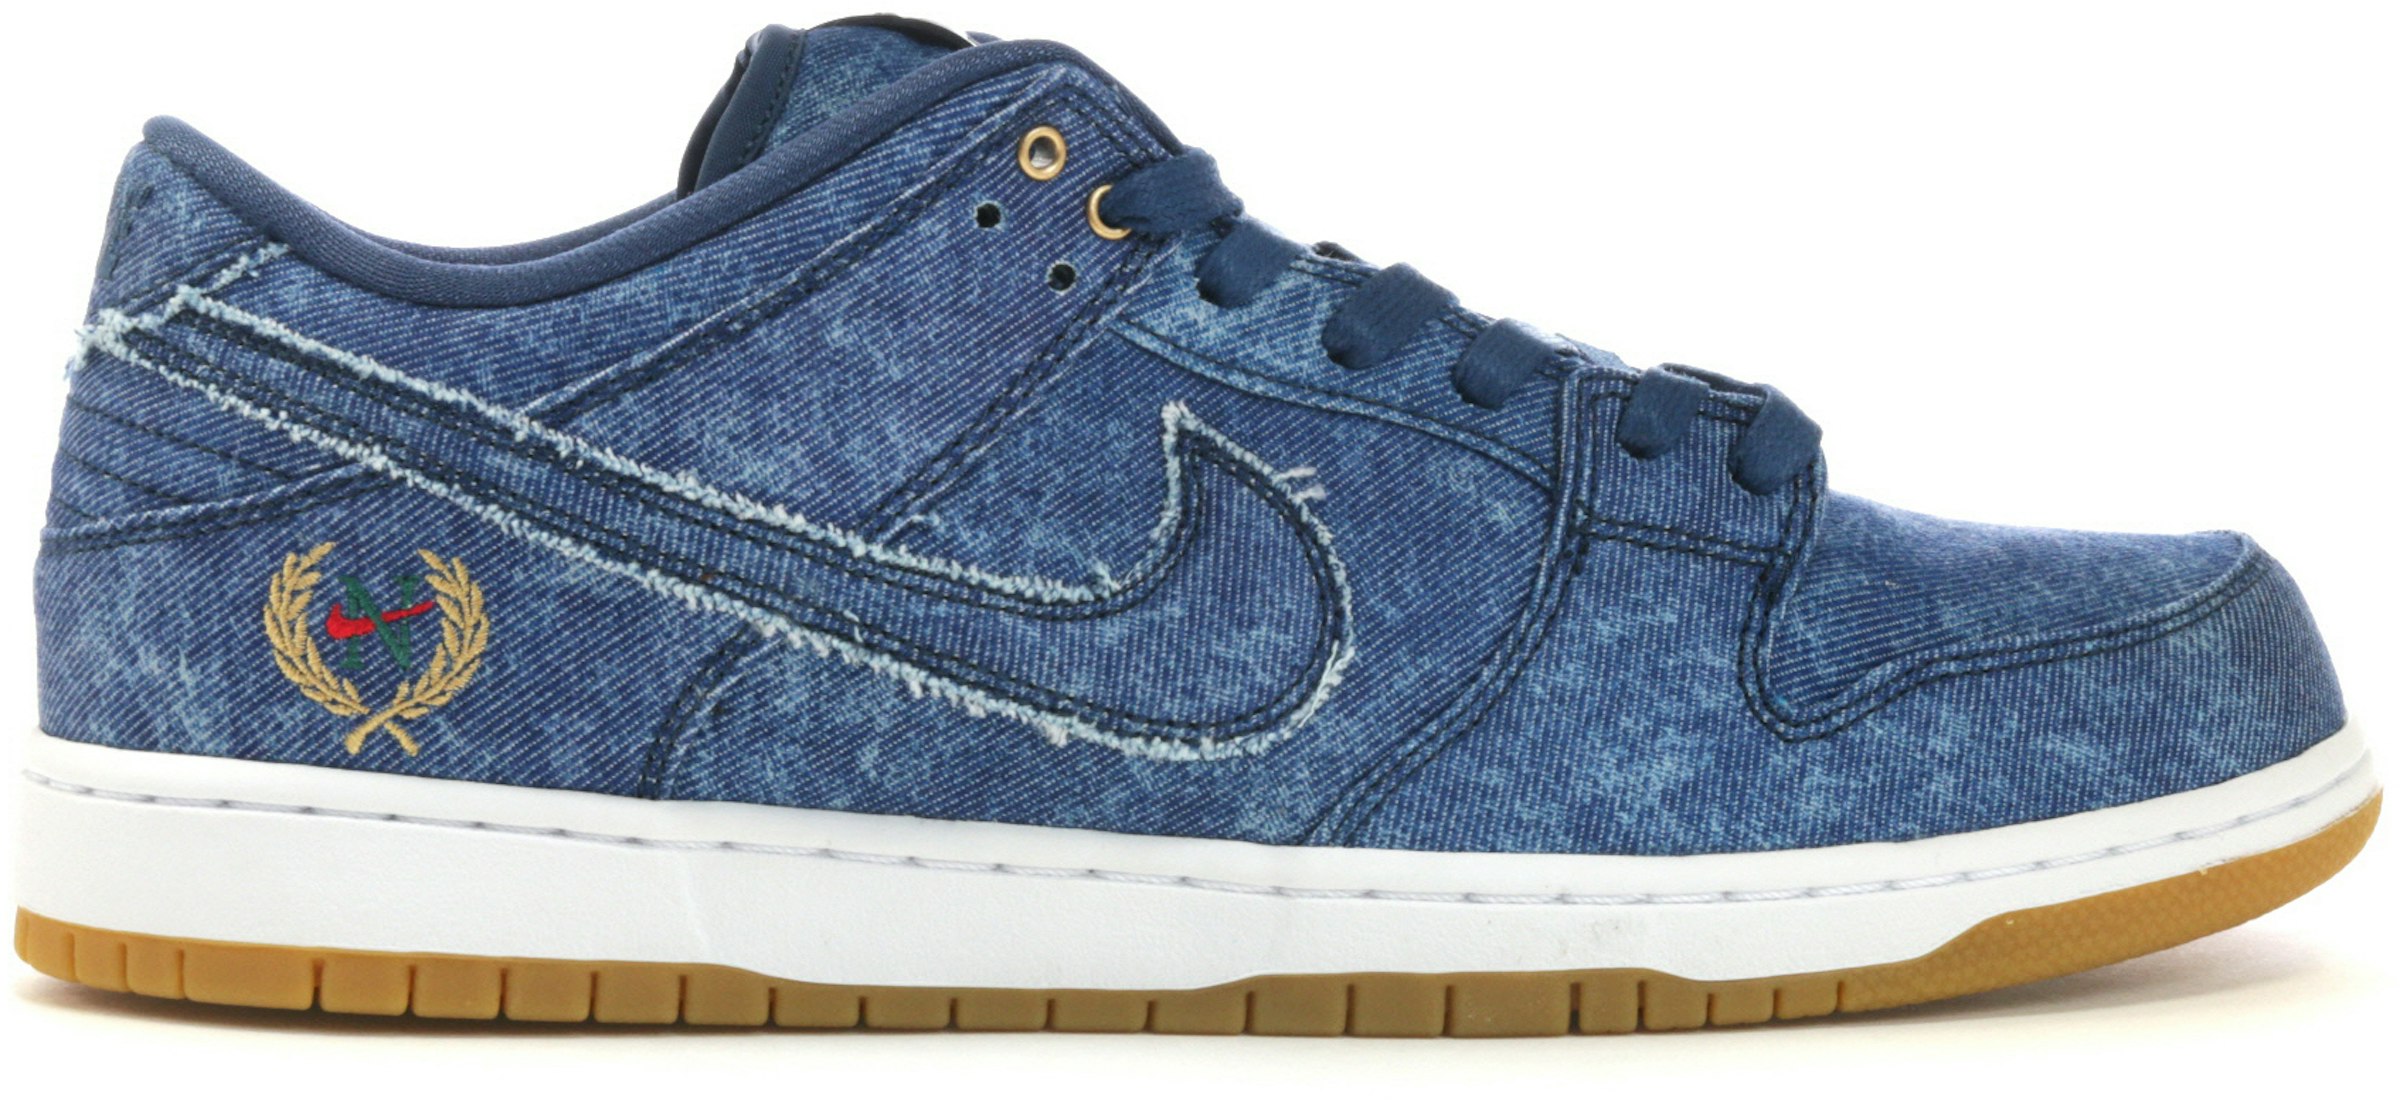 Nike SB Dunk Low Rivals Pack (East) - 883232-441 US